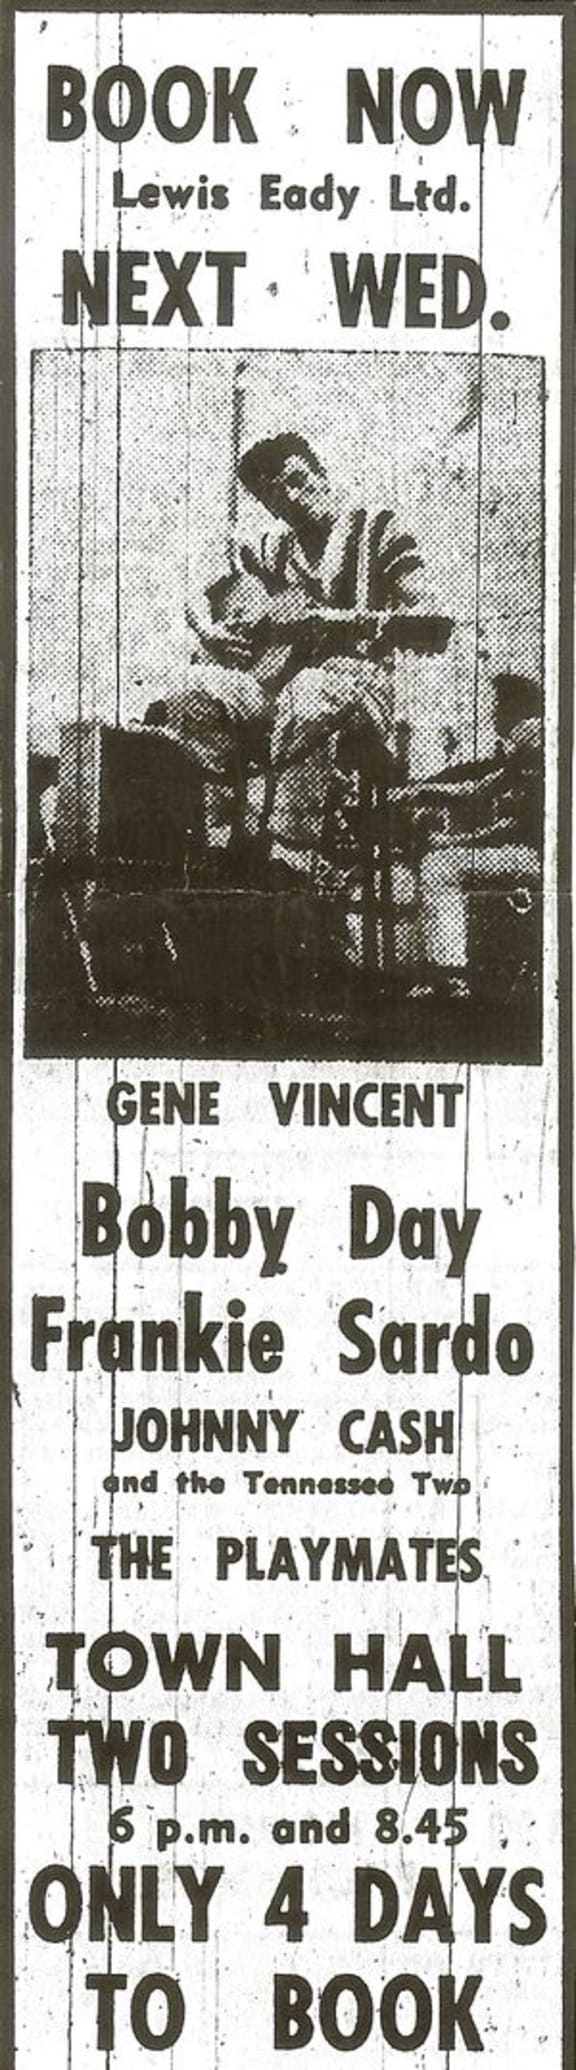 In April 1959 New Zealand got its first taste of big time rock & roll, when a show headlined by Johnny Cash and Gene Vincent played at Auckland's Town Hall.